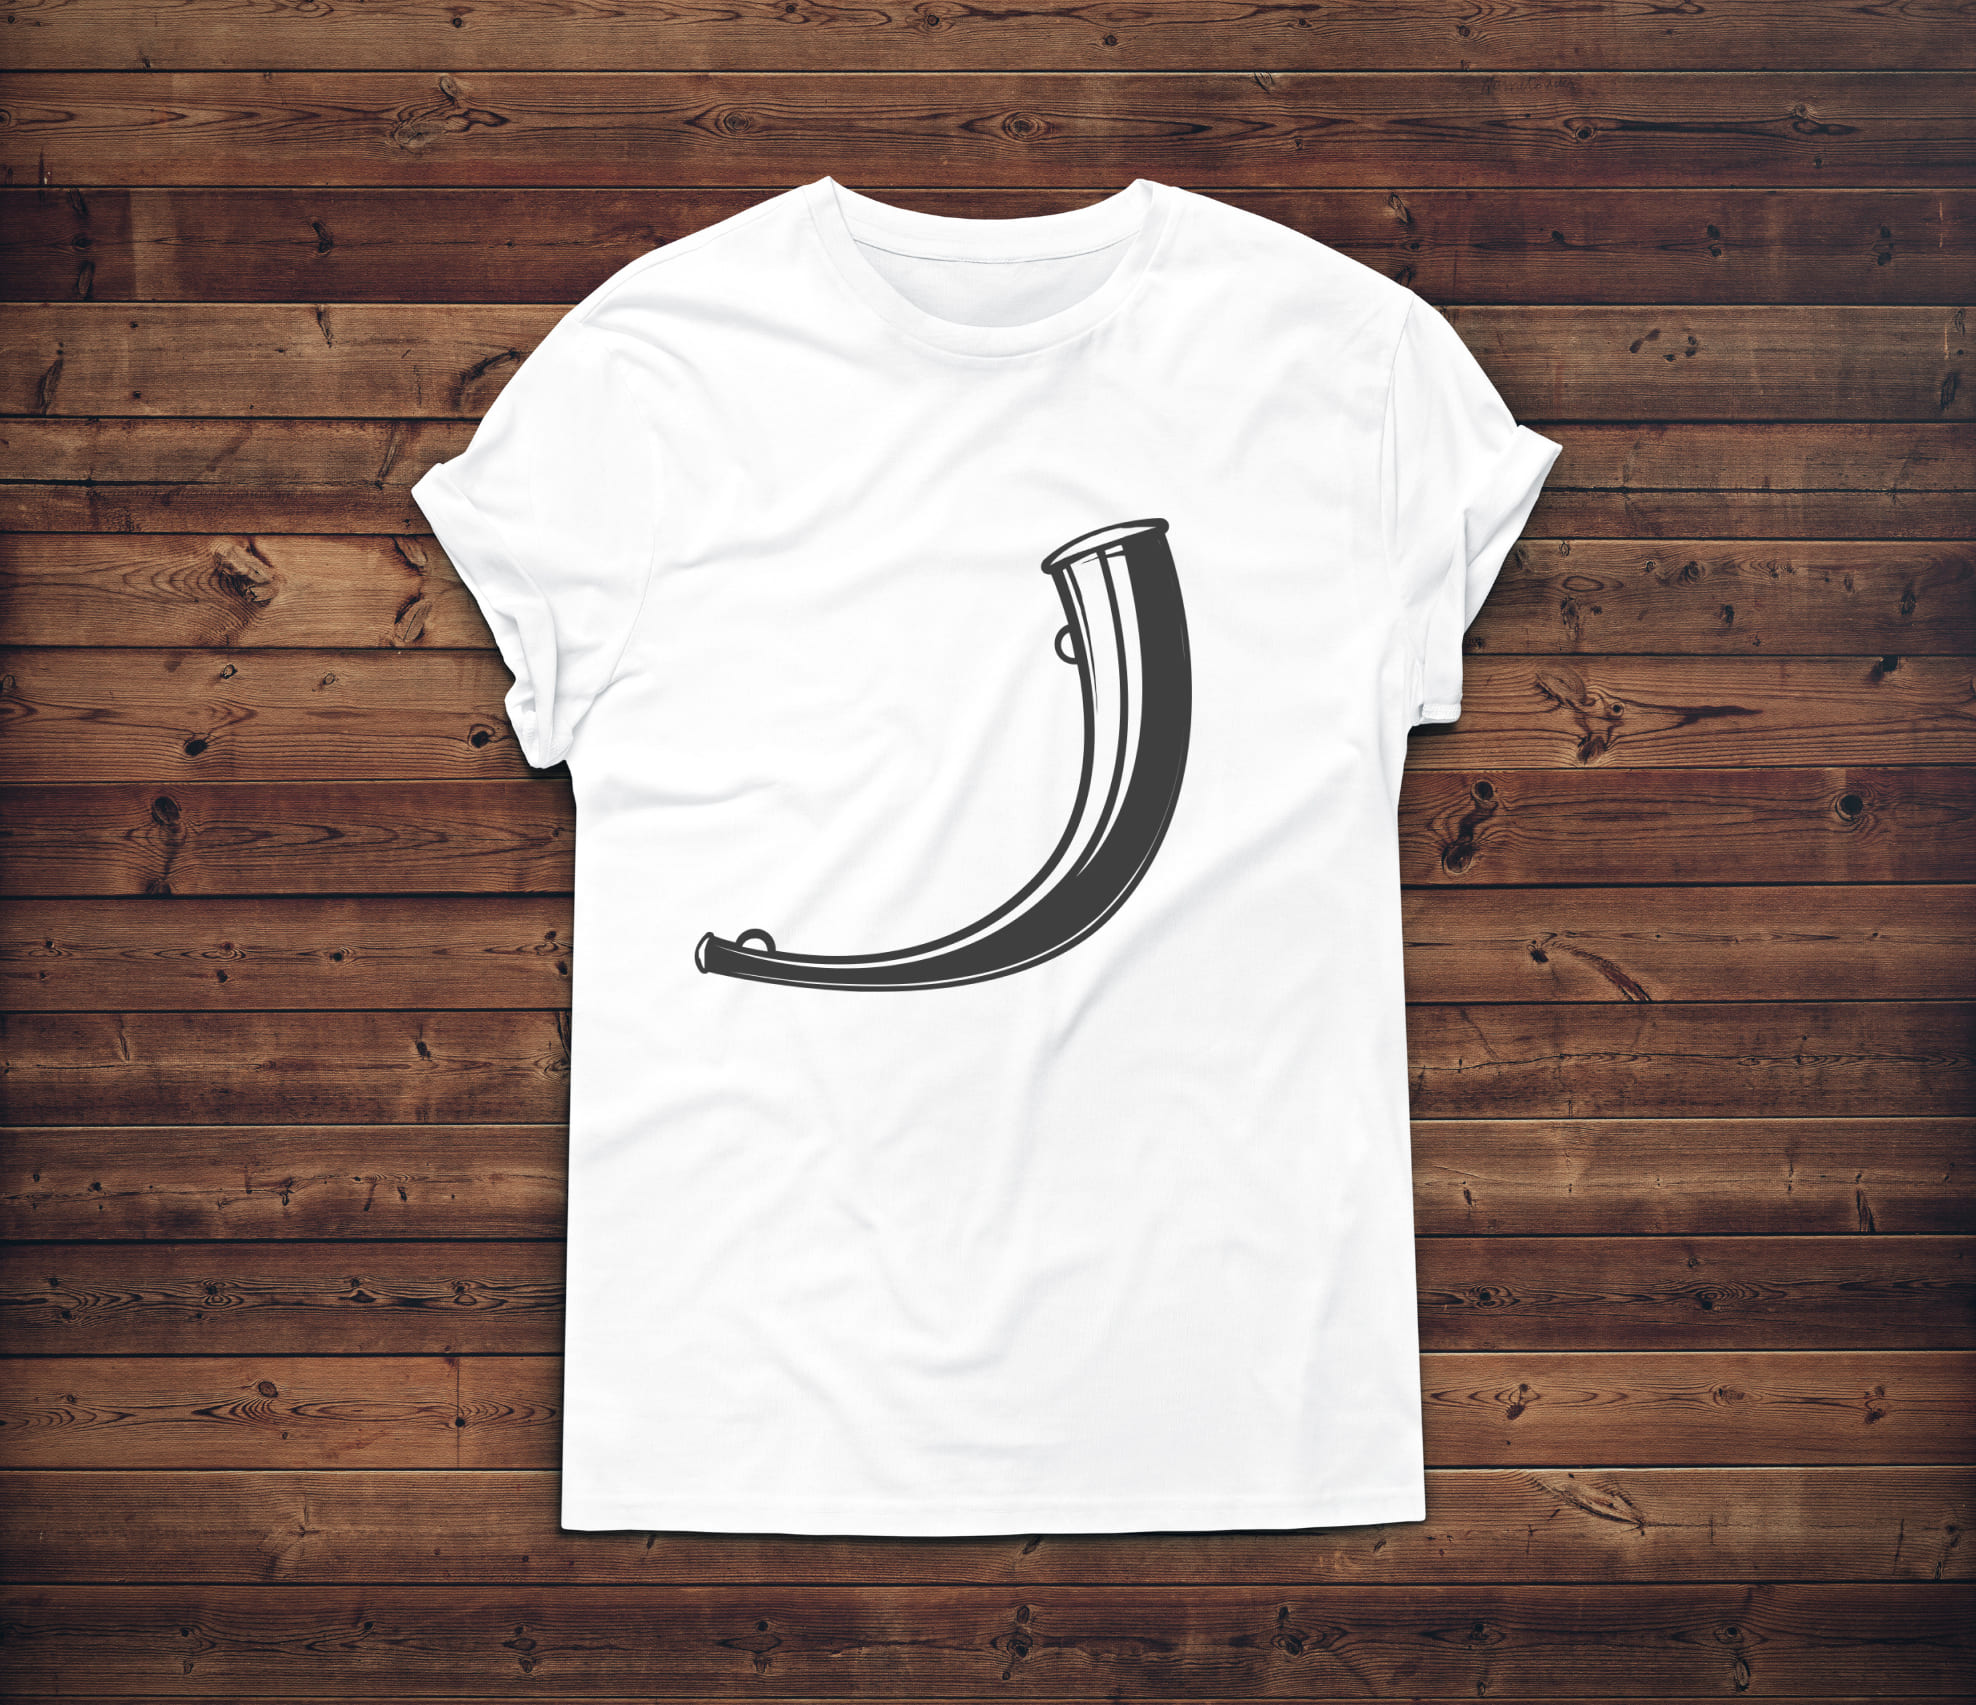 Image of white t-shirt with adorable horn silhouette print.